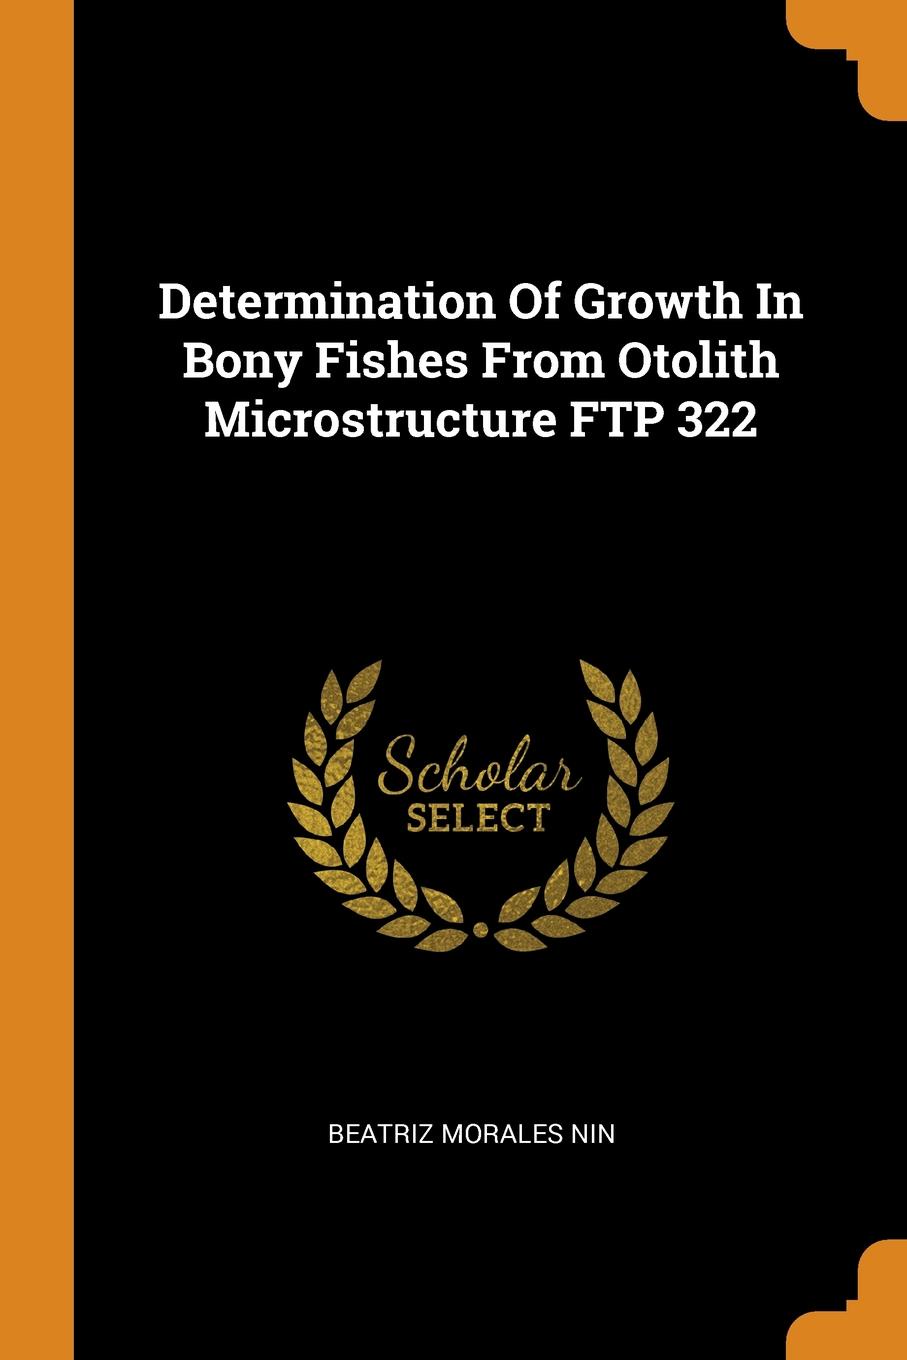 Determination Of Growth In Bony Fishes From Otolith Microstructure FTP 322